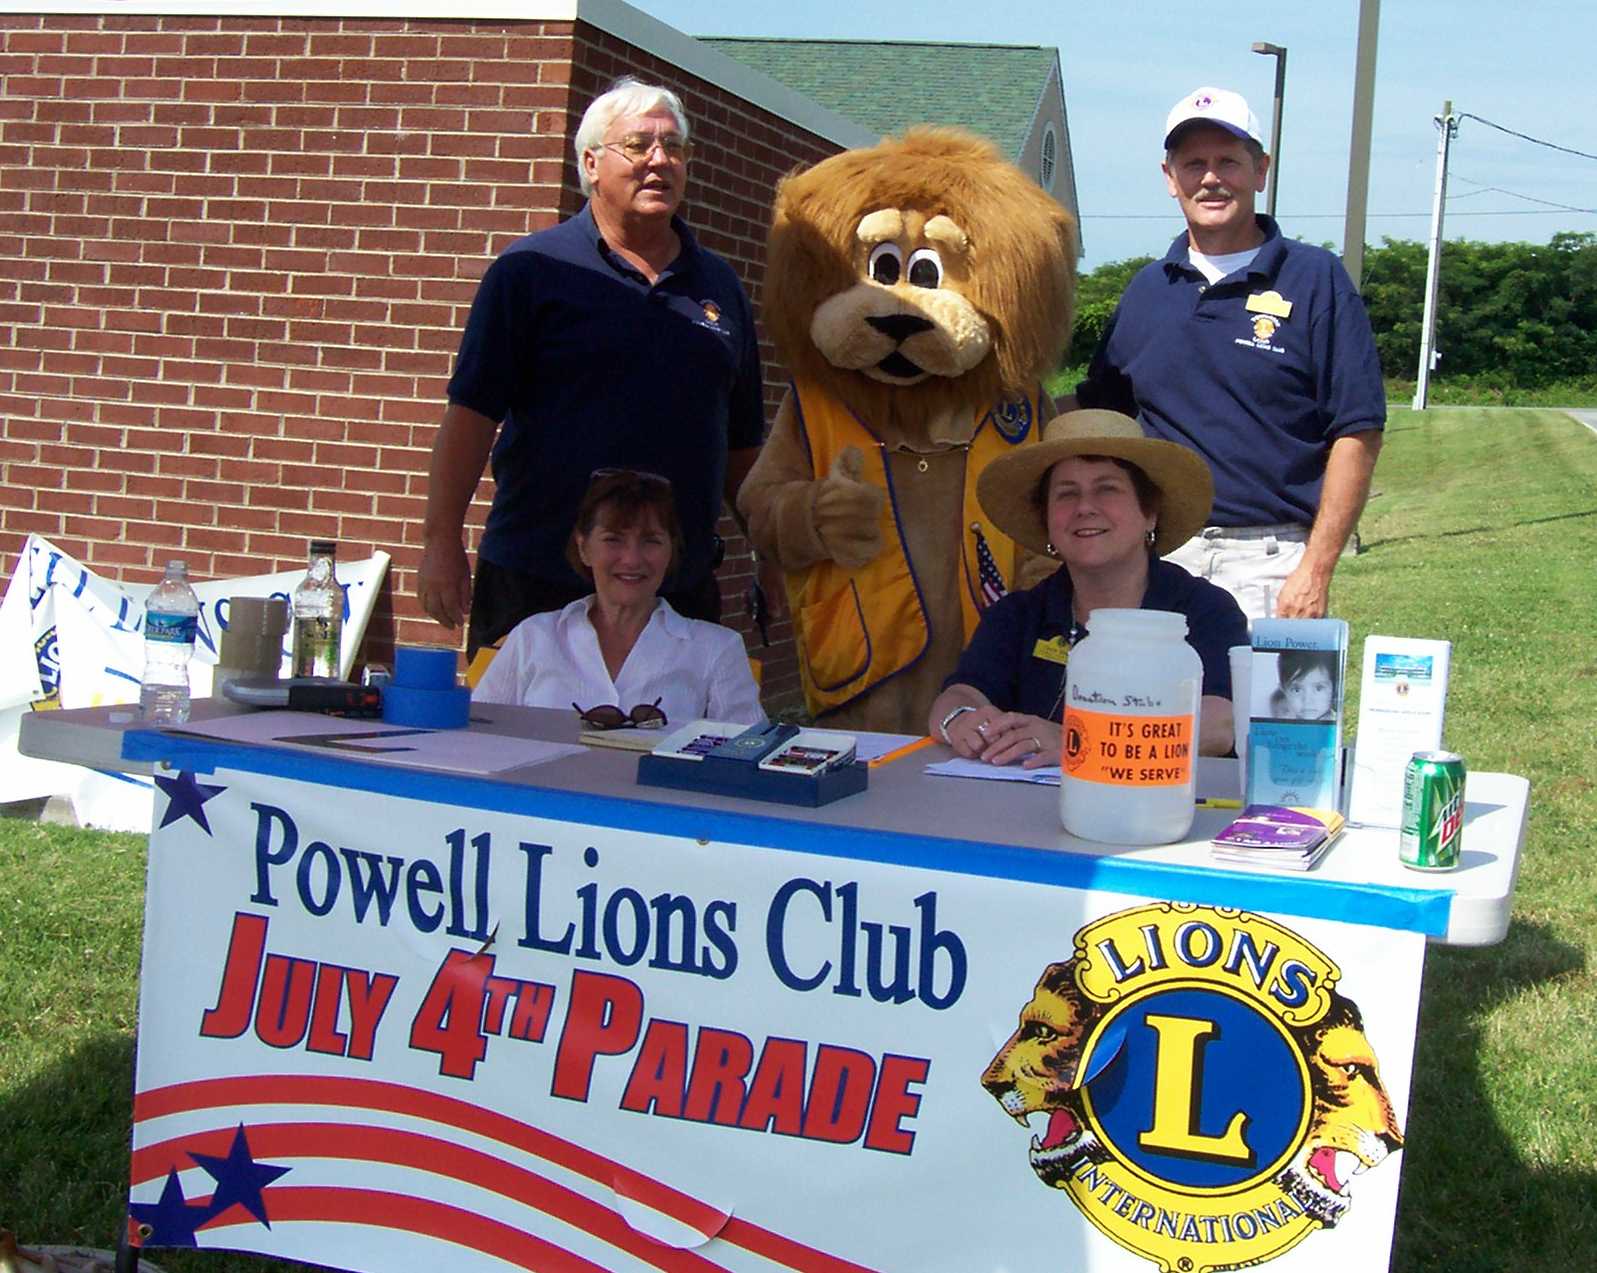 With Powell Lions